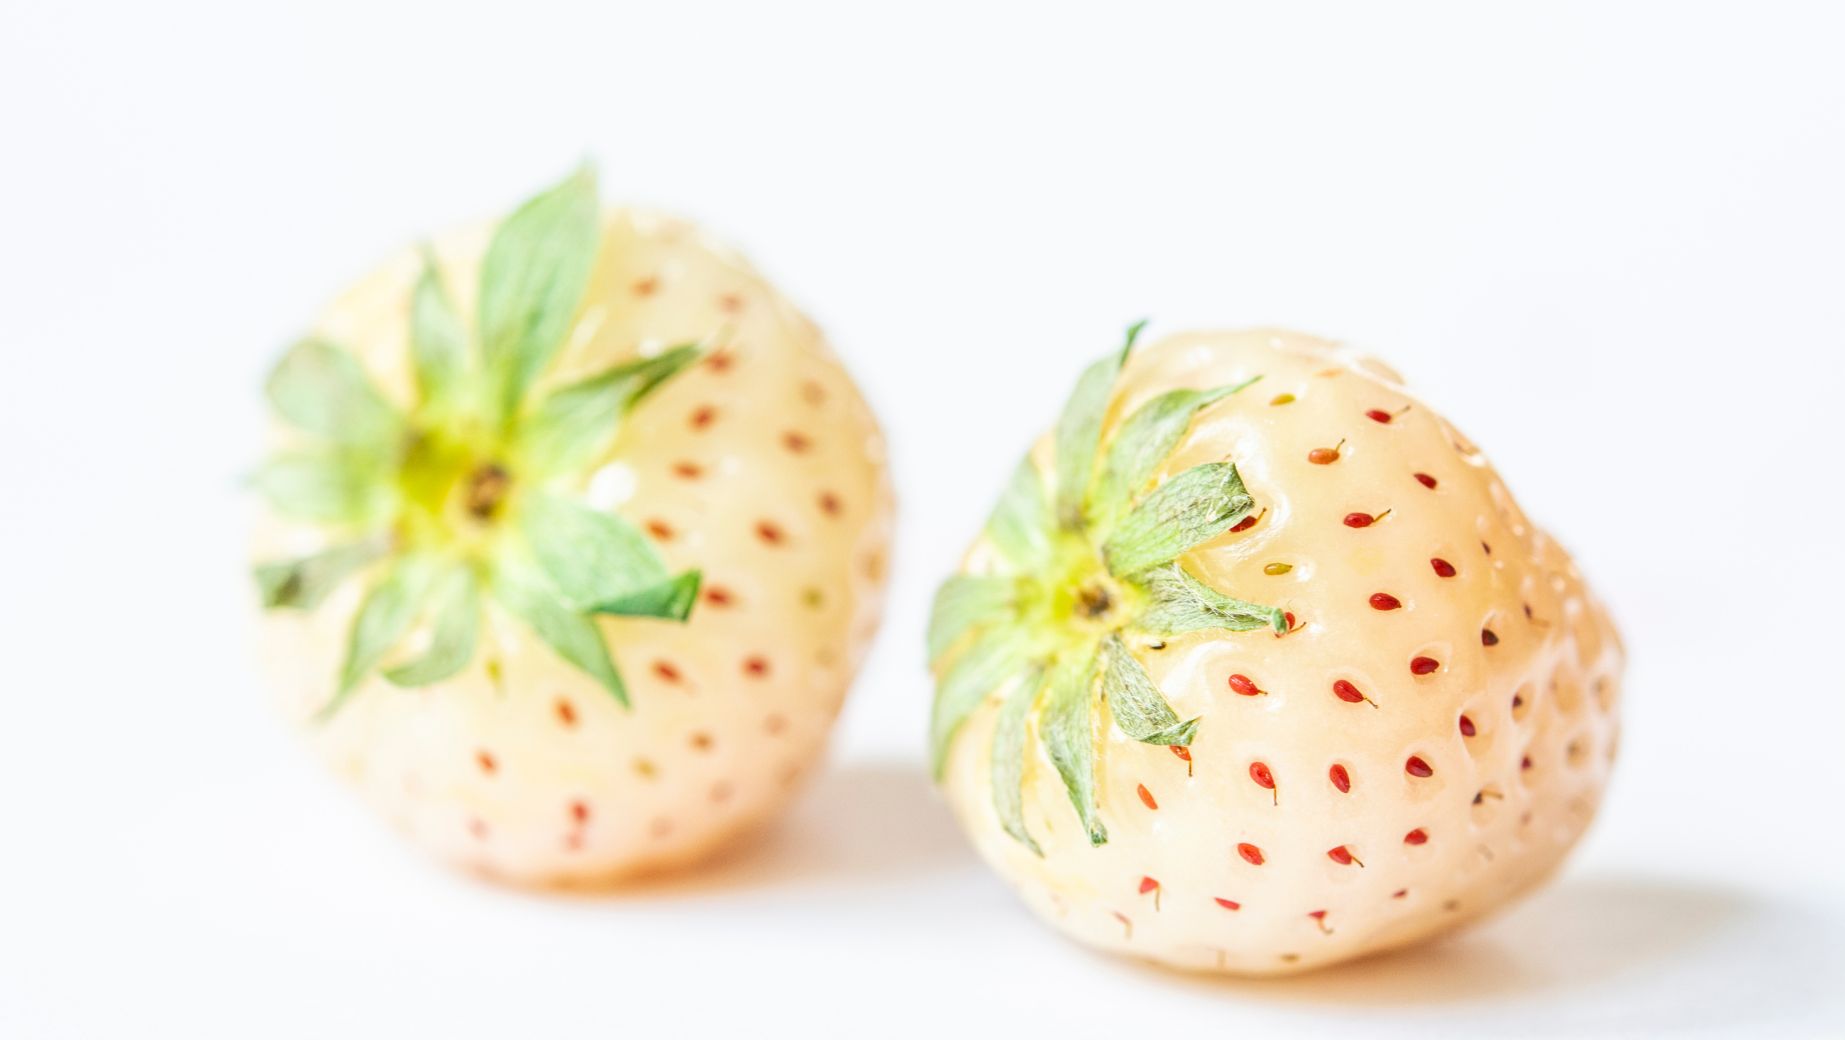 Healthy Reasons to Munch on Pineberries